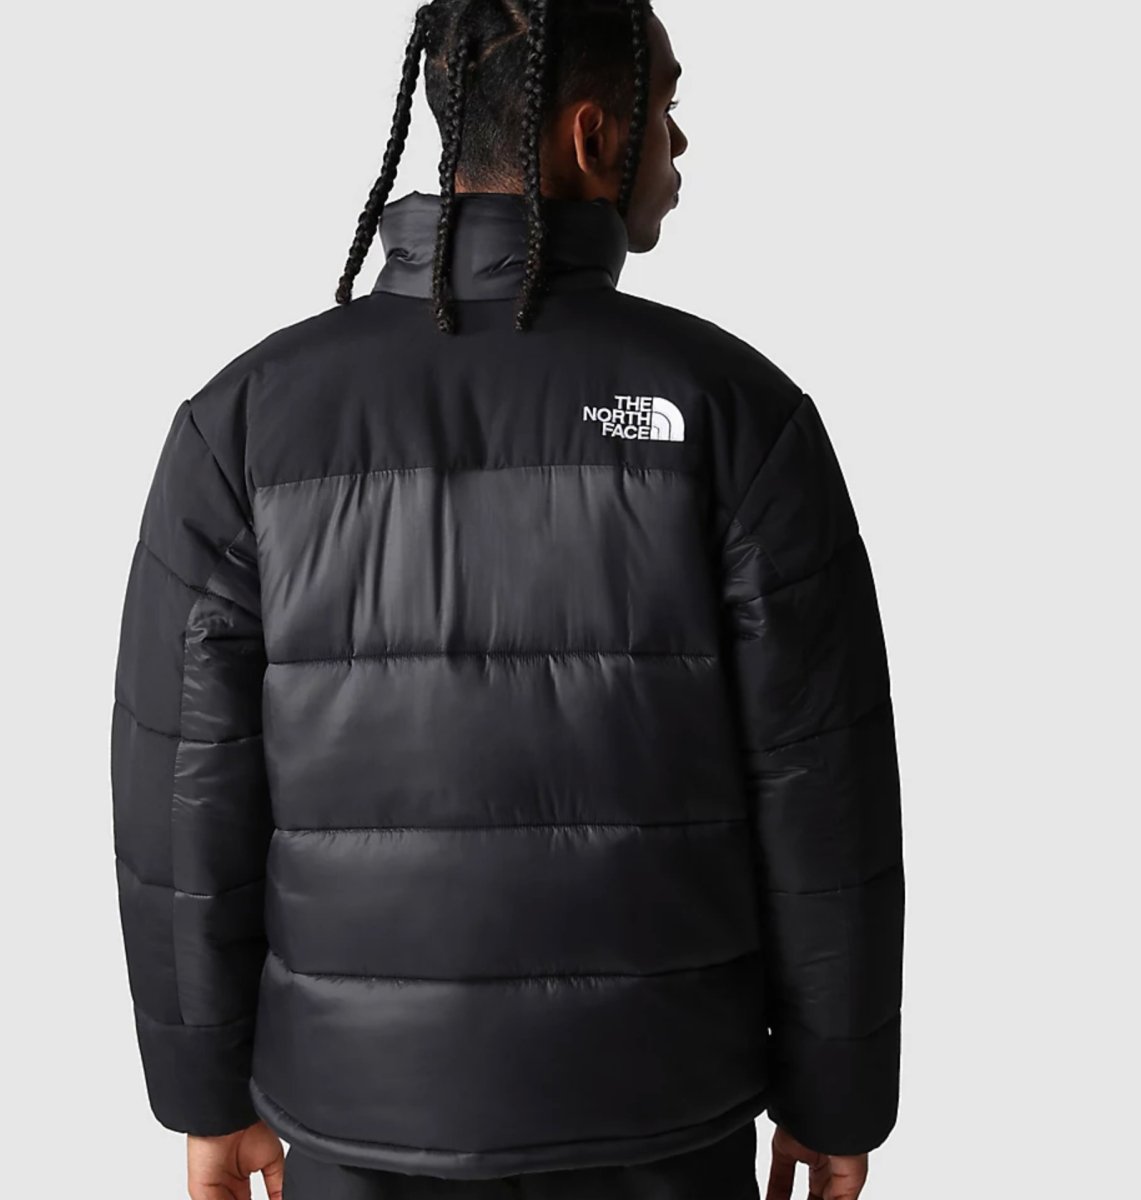 NF HMLYN insulated Jacket TNF Black - KYOTO - The North Face